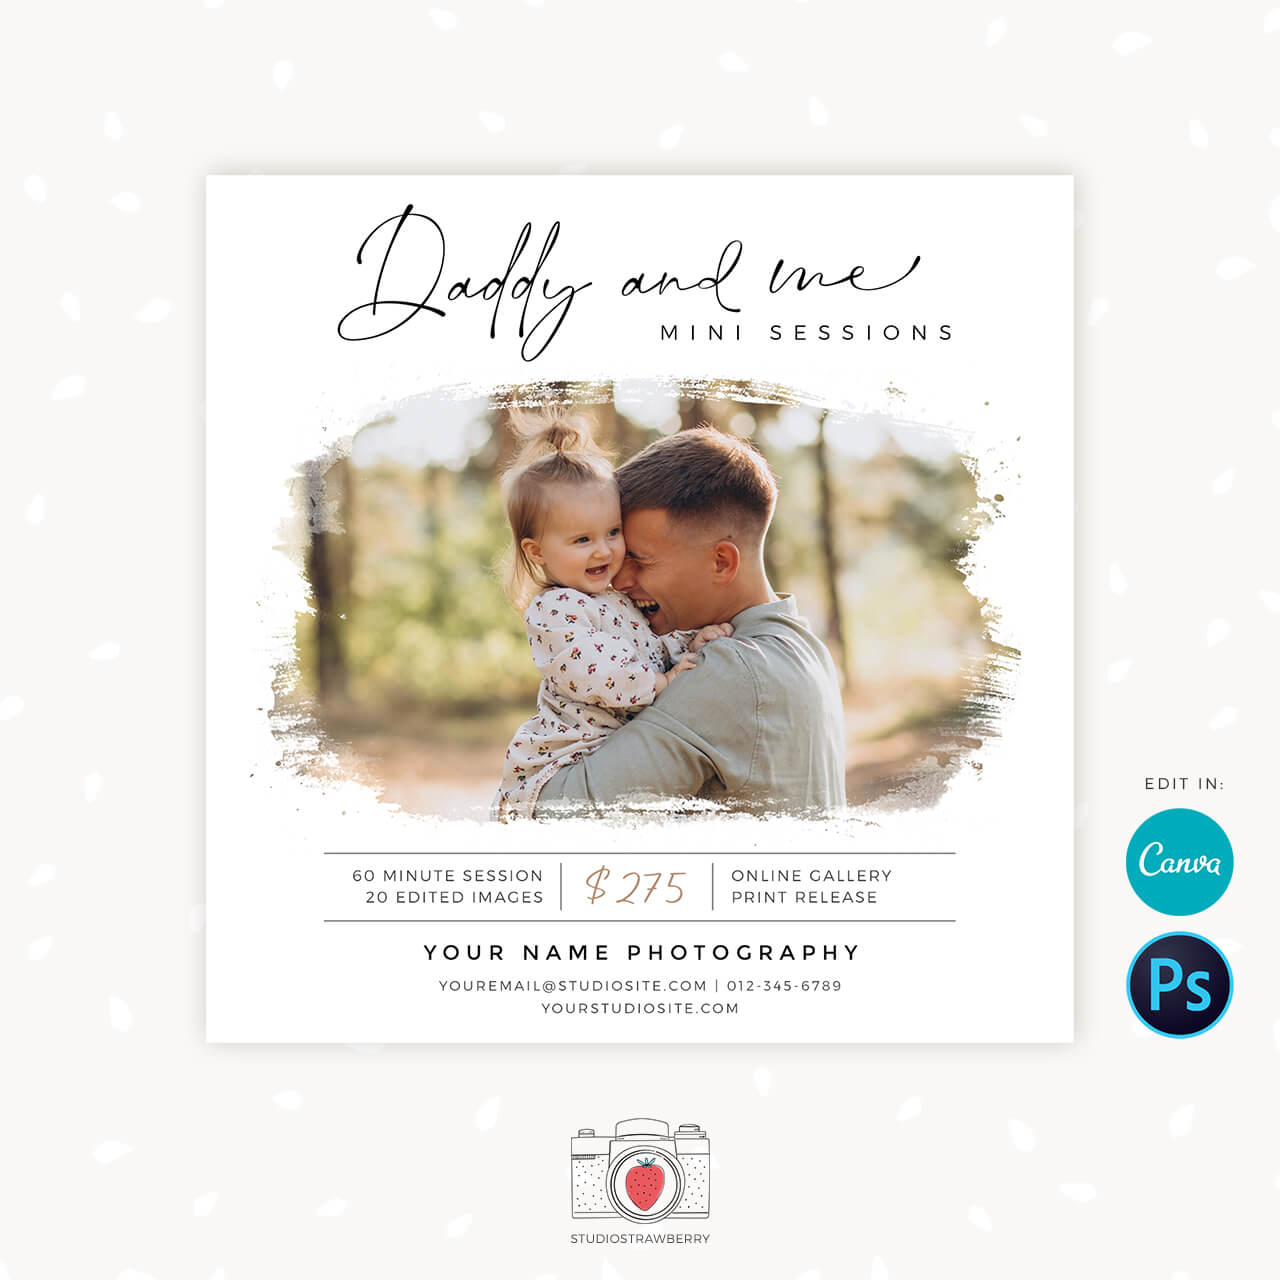 Daddy and me mini sessions template